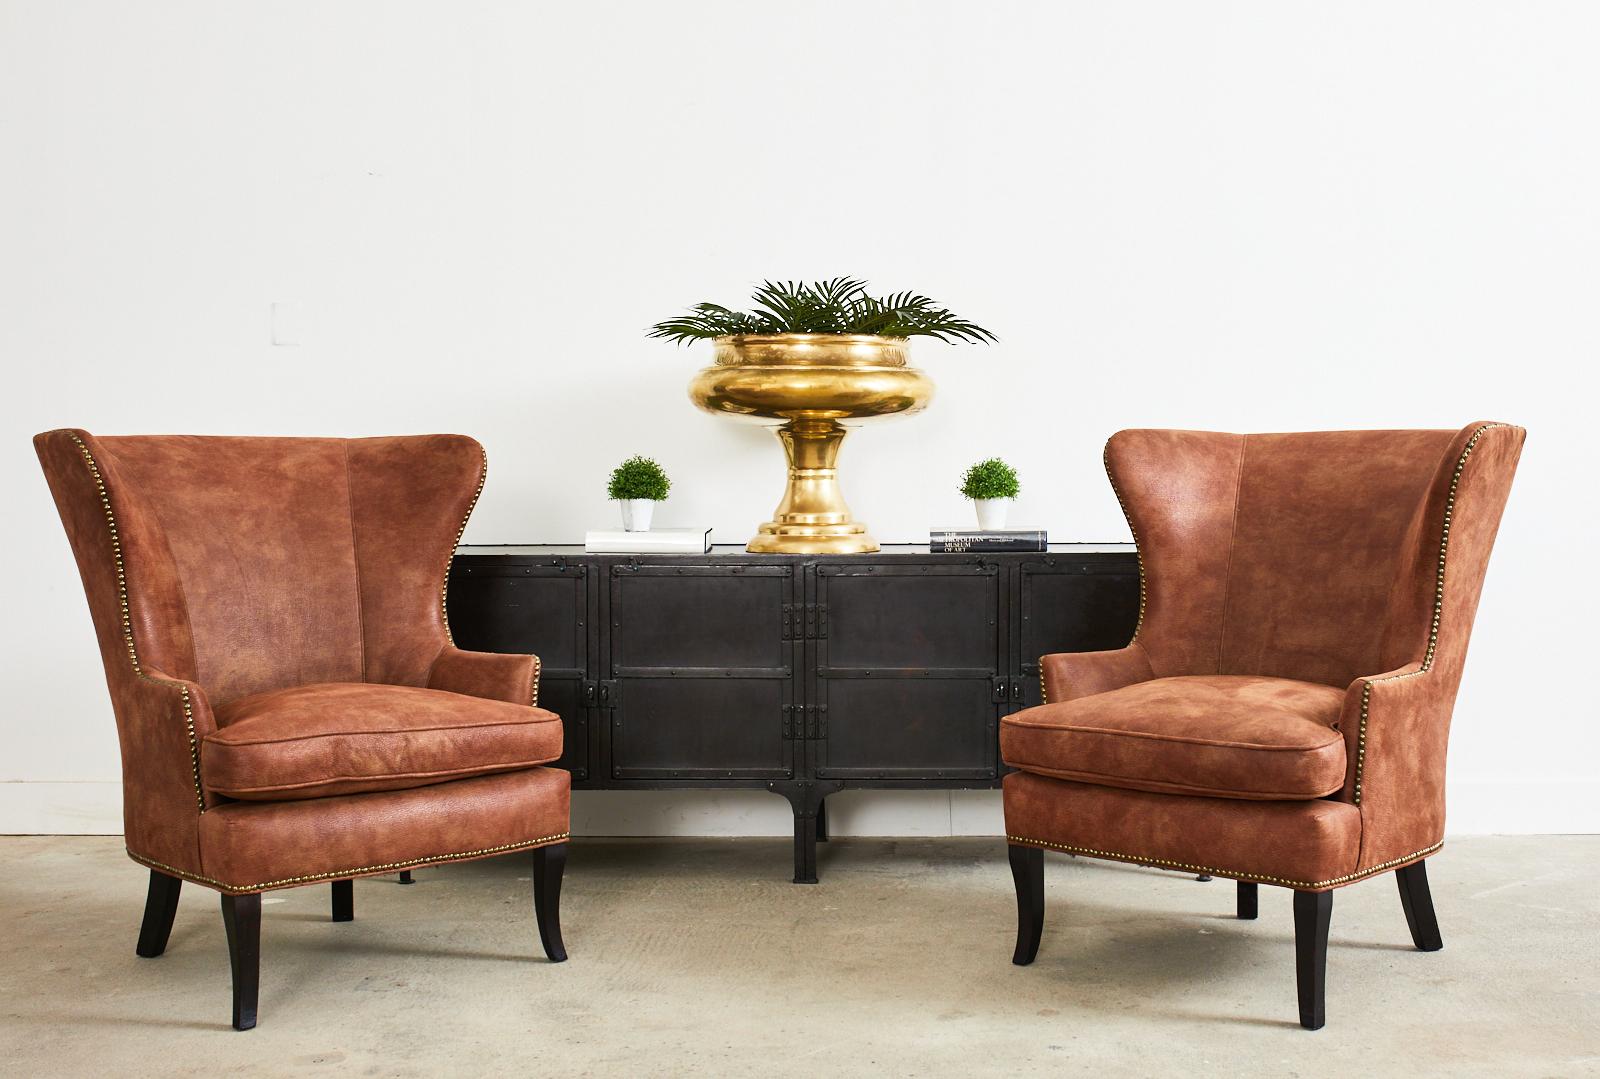 Distinctive pair of modern wingback armchairs featuring an intentionally distressed faux-leather upholstery by Christian Audigier. Crafted from hardwood frames with large, wide wings gracefully curving down to the narrow arms. Bordered by brass tack